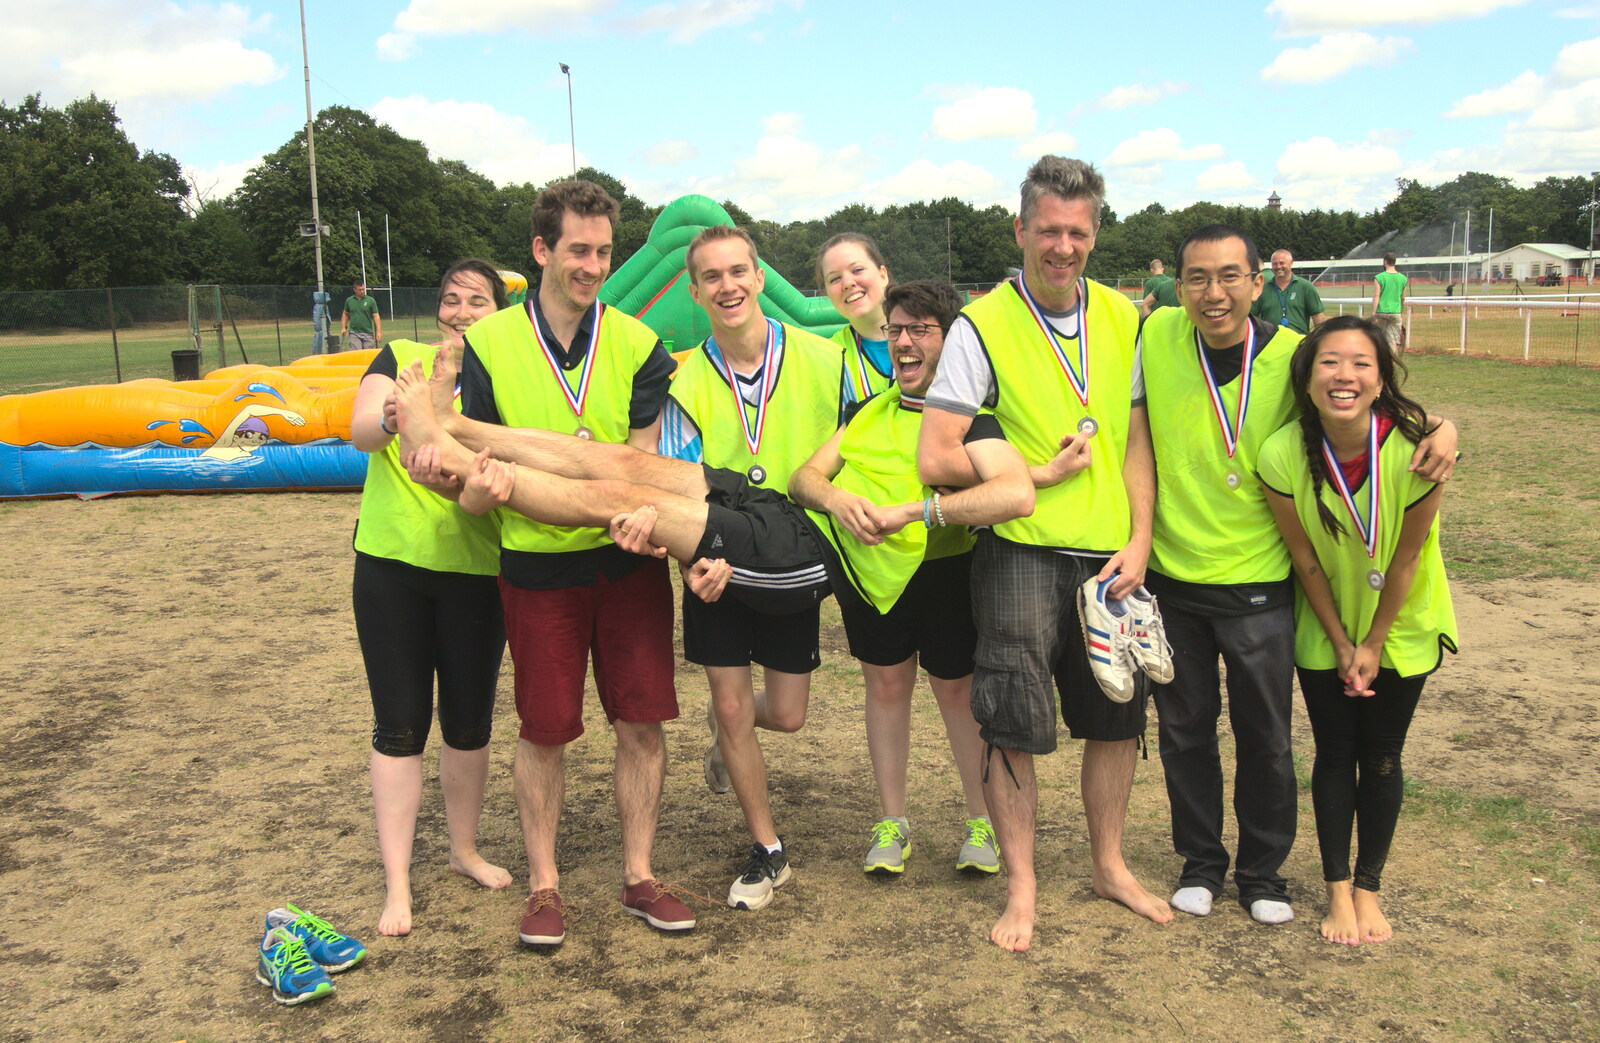 Thomas is held up by the yellow team from It's a SwiftKey Knockout, Richmond Rugby Club, Richmond, Surrey - 7th July 2015